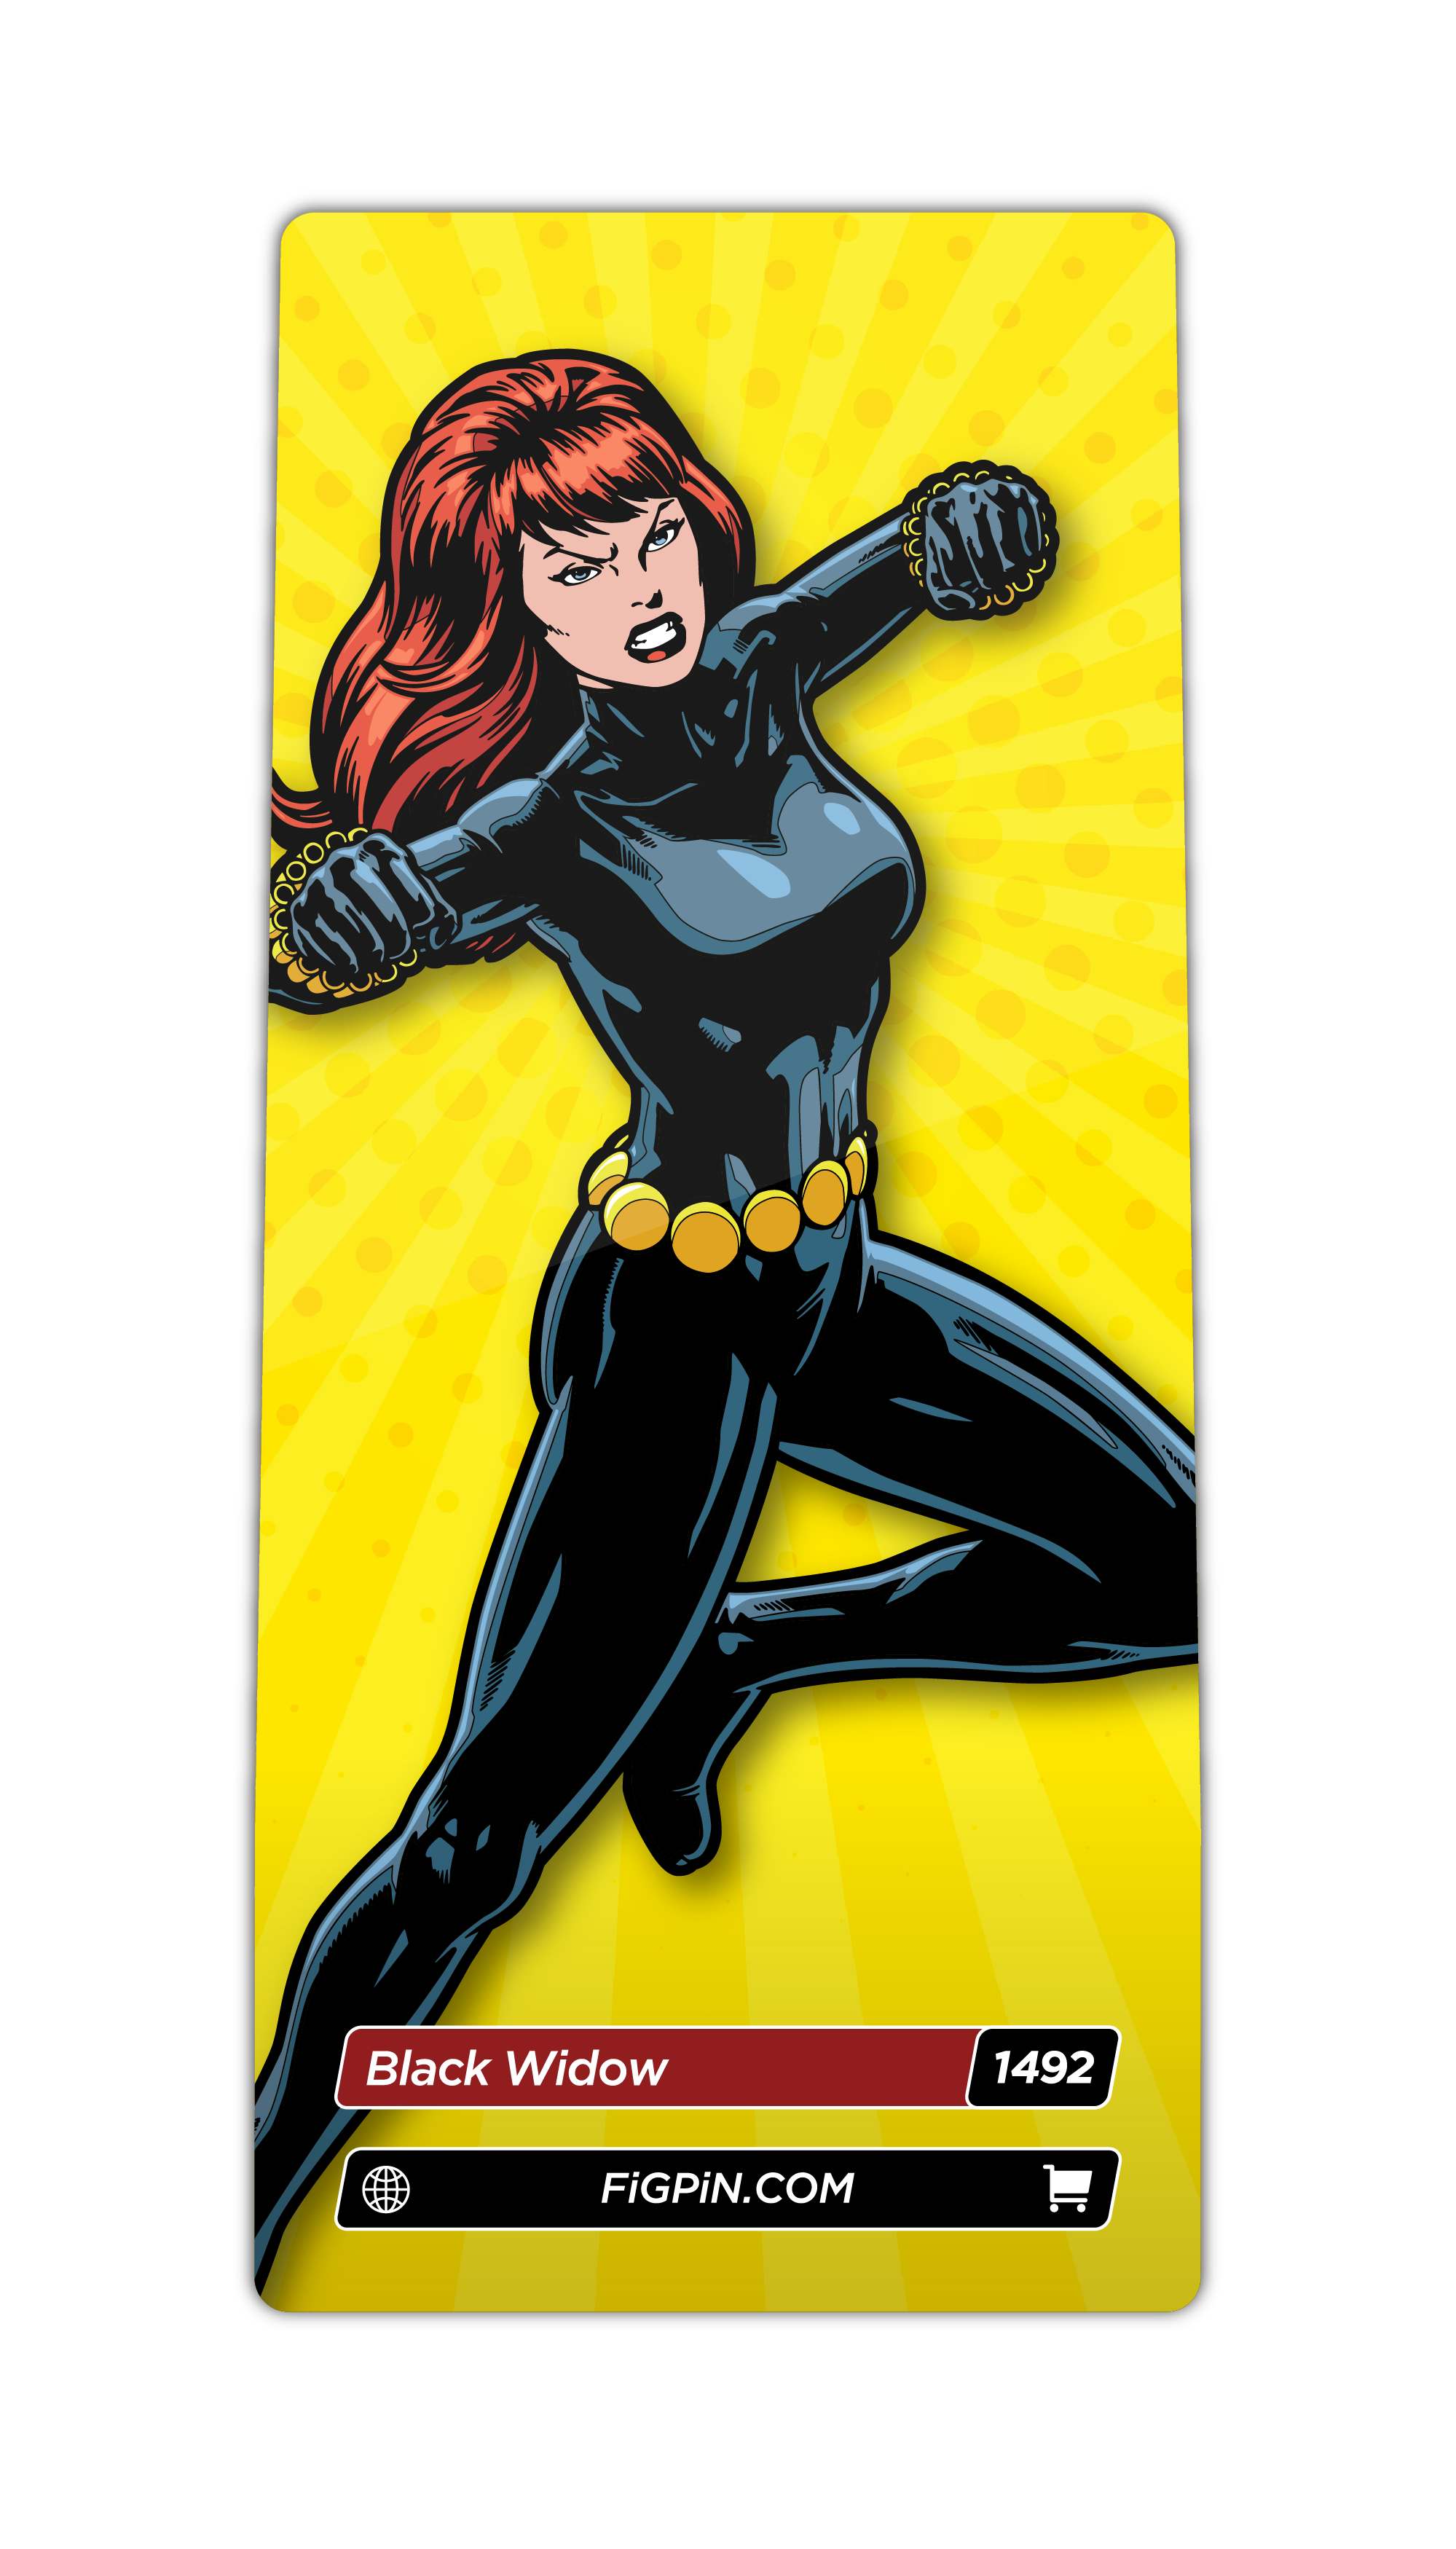 Character card of Marvel's Black Widow with text “Black Widow (1492)” and link to FiGPiN’s website